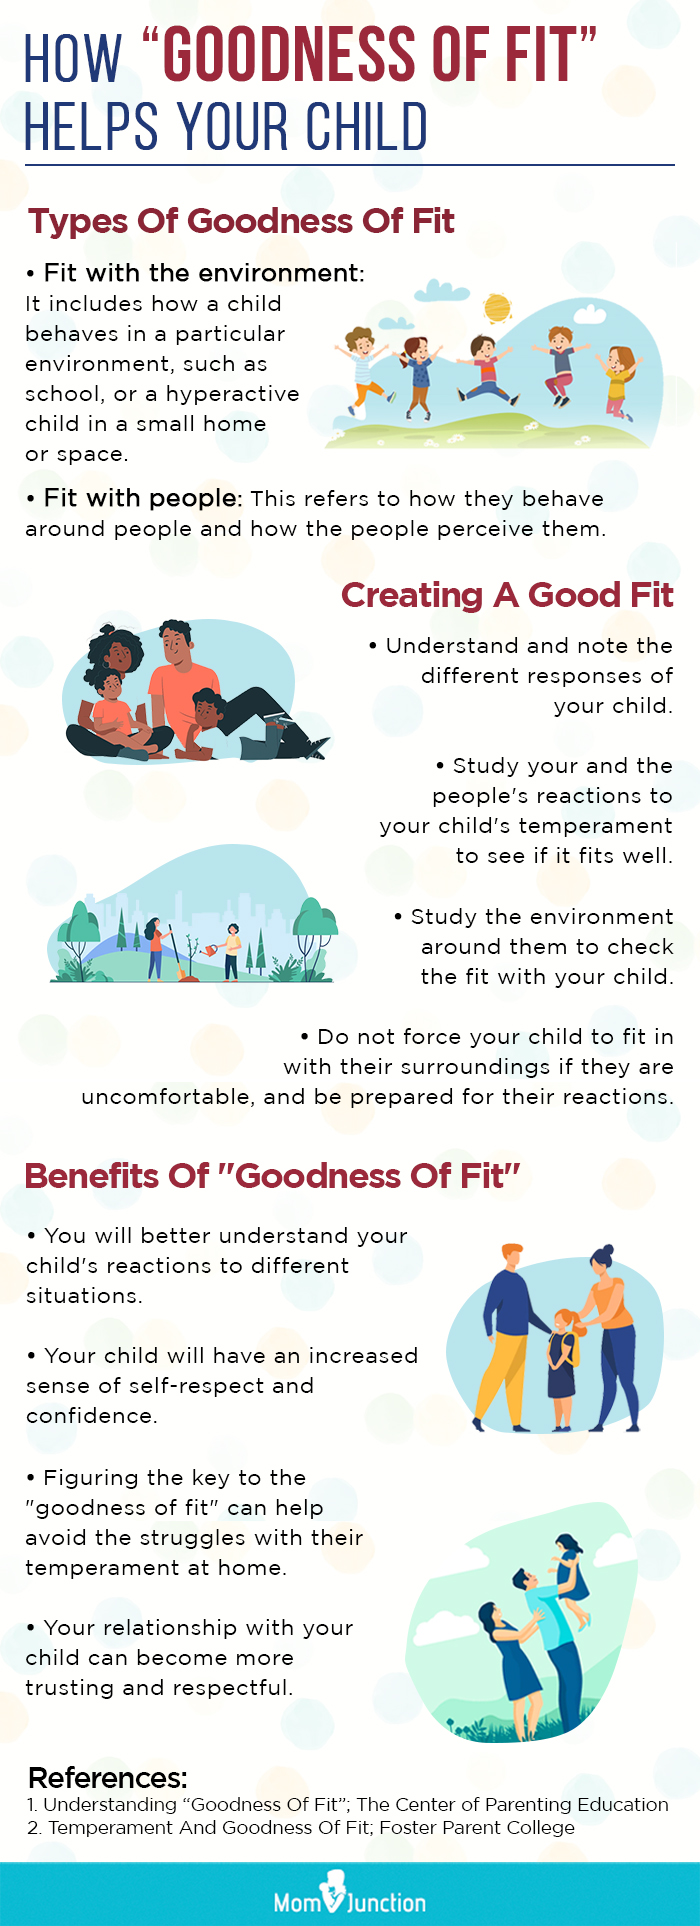  Your Child’s Temperament And “Goodness Of Fit” (infographic)